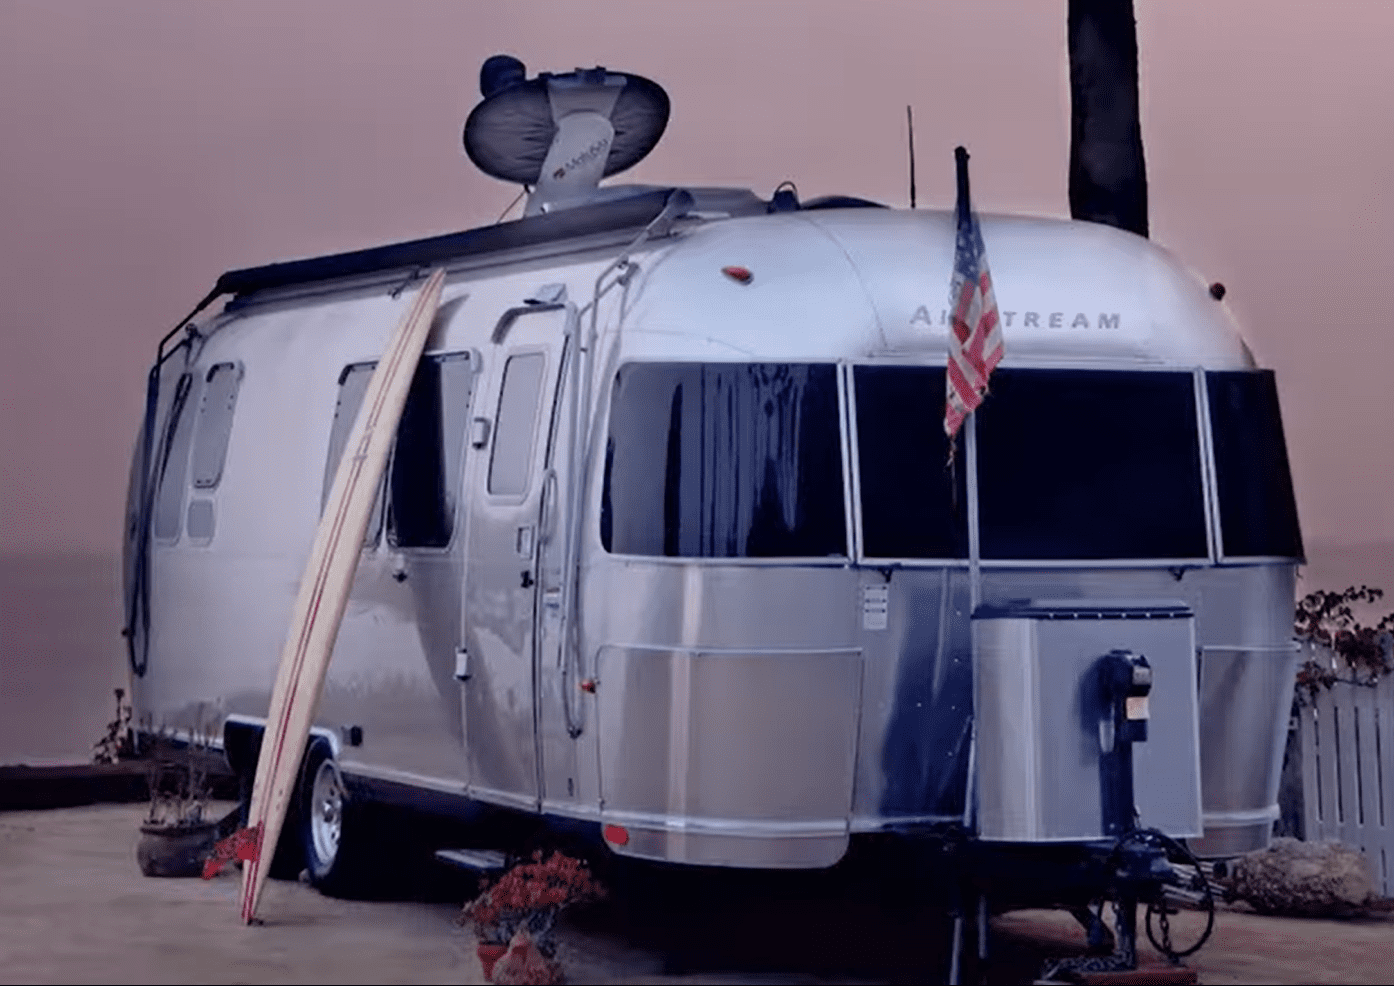 An Airstream trailer. | Source: YouTube/Famous Entertainment